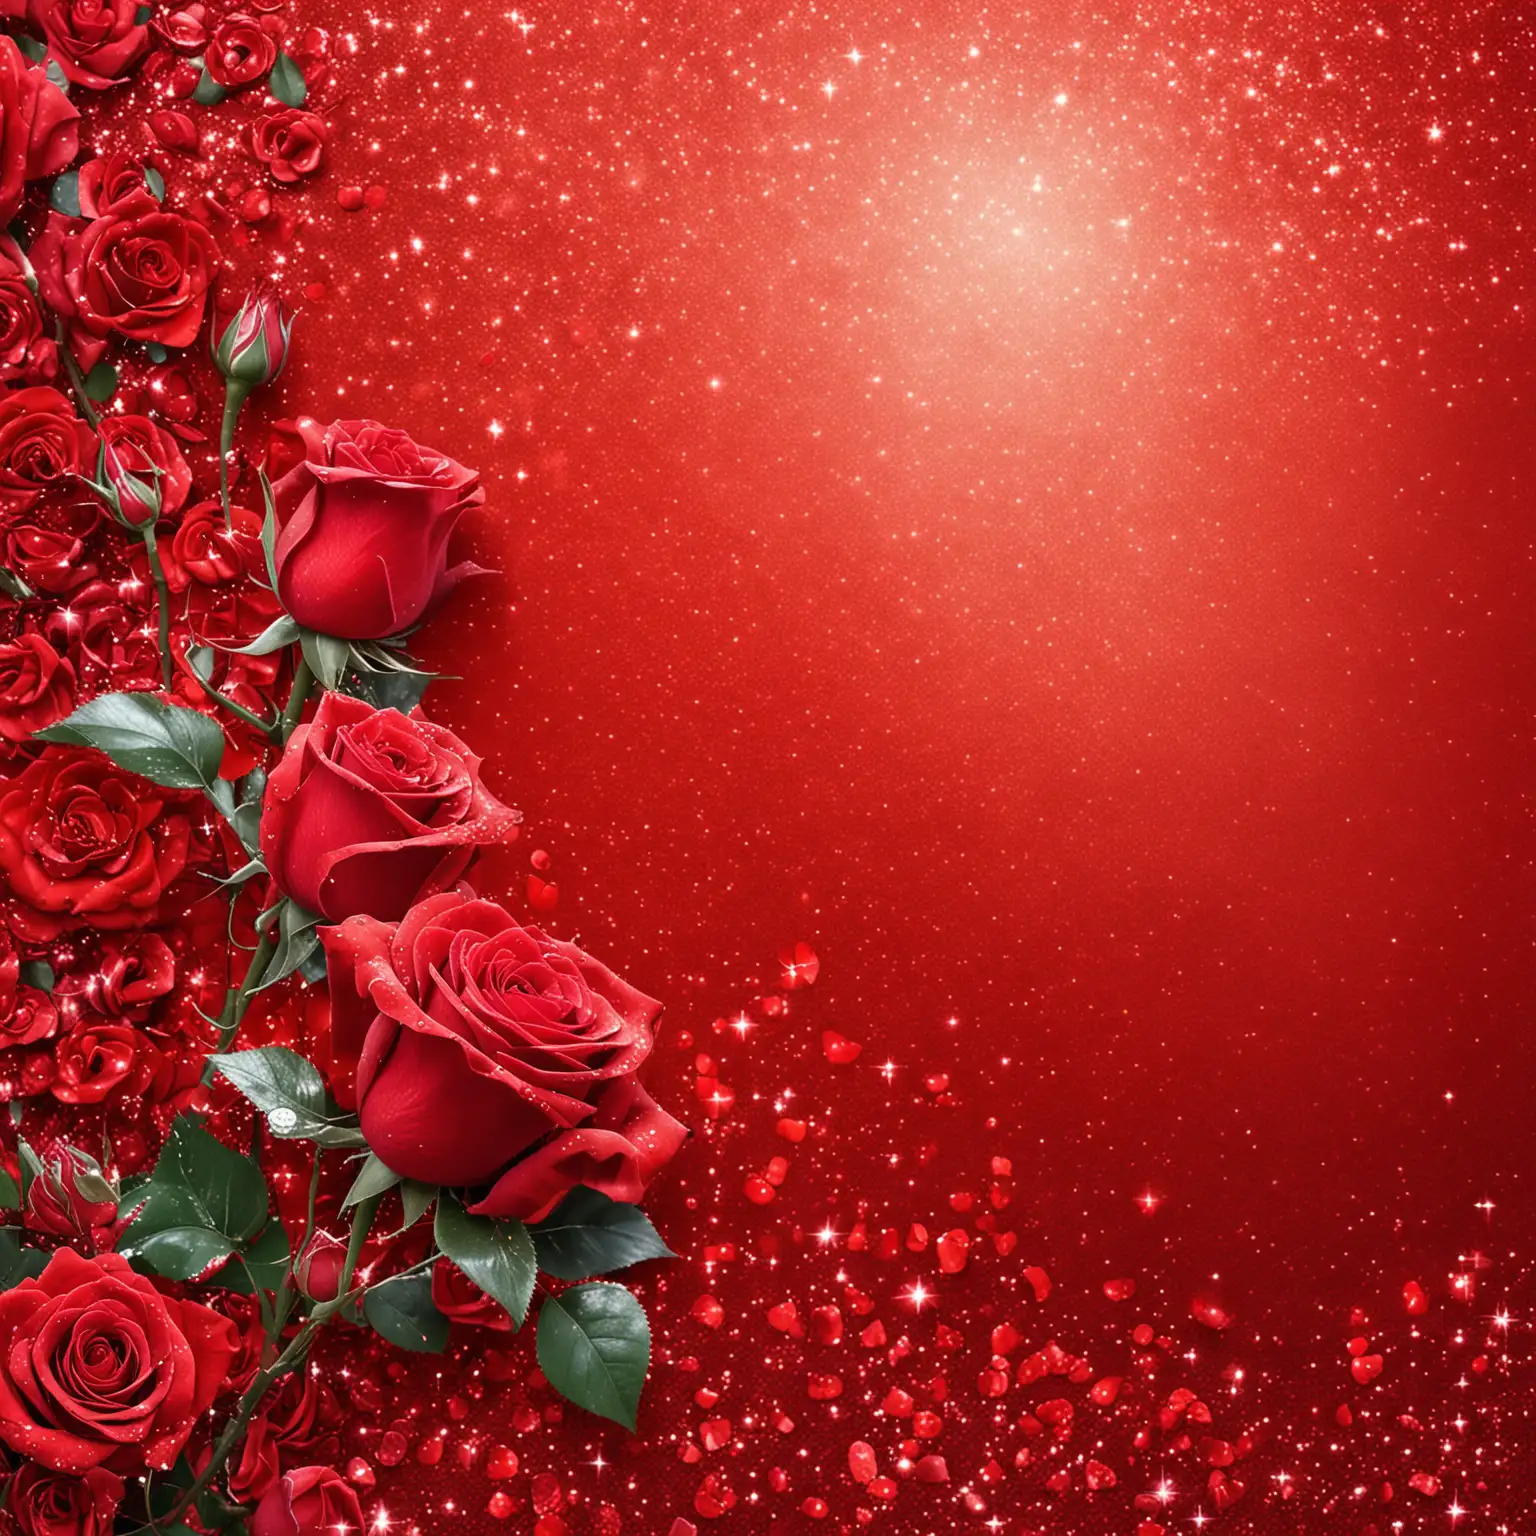 beautiful bright red sparkly background with roses